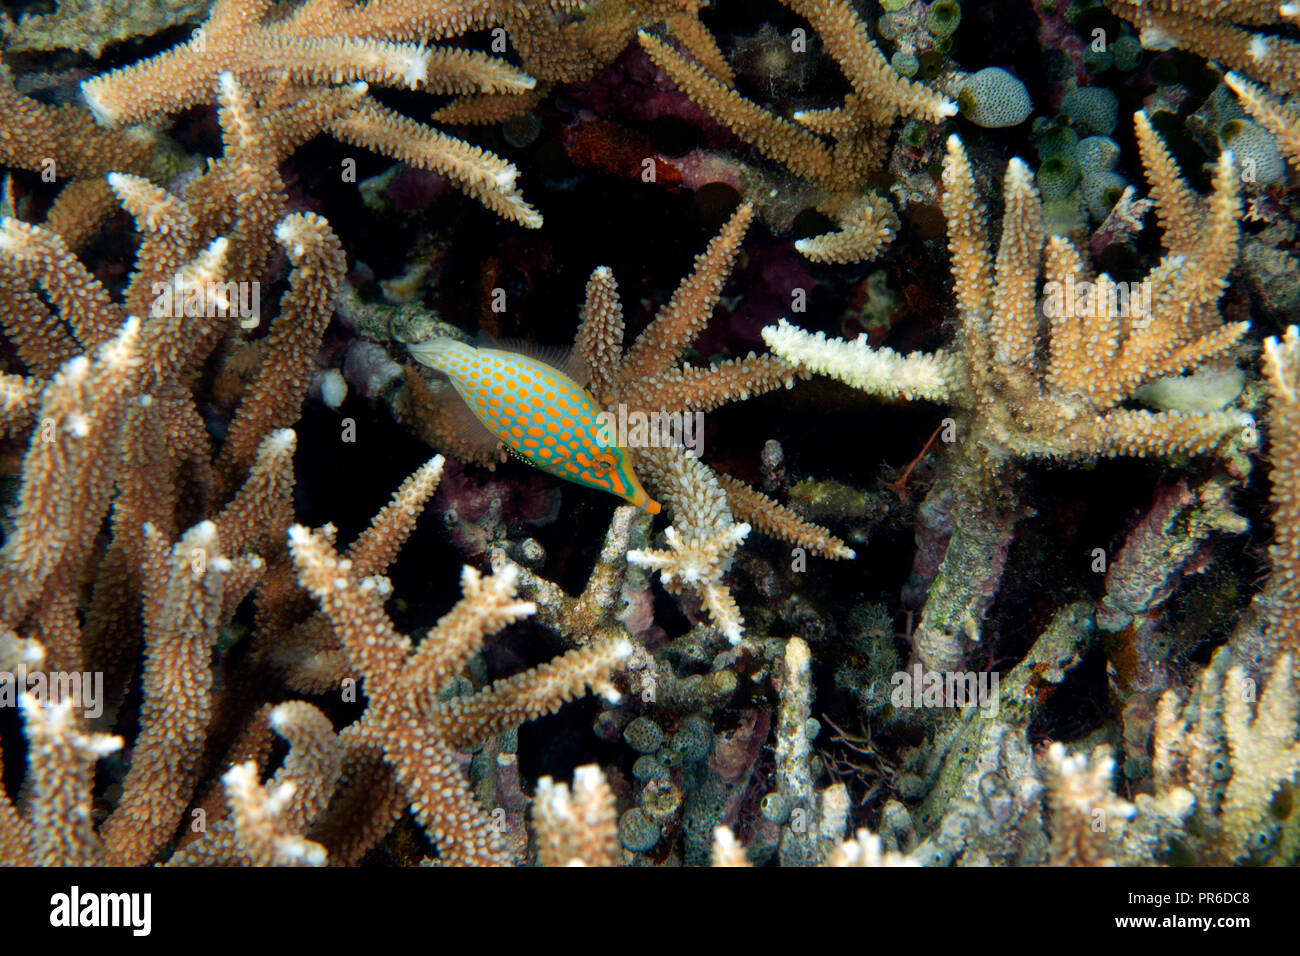 Longnose or orange spotted filefish, Oxymonacanthus longirostris, swims by coral Acropora sp., Pohnpei, Federated States of Micronesia Stock Photo